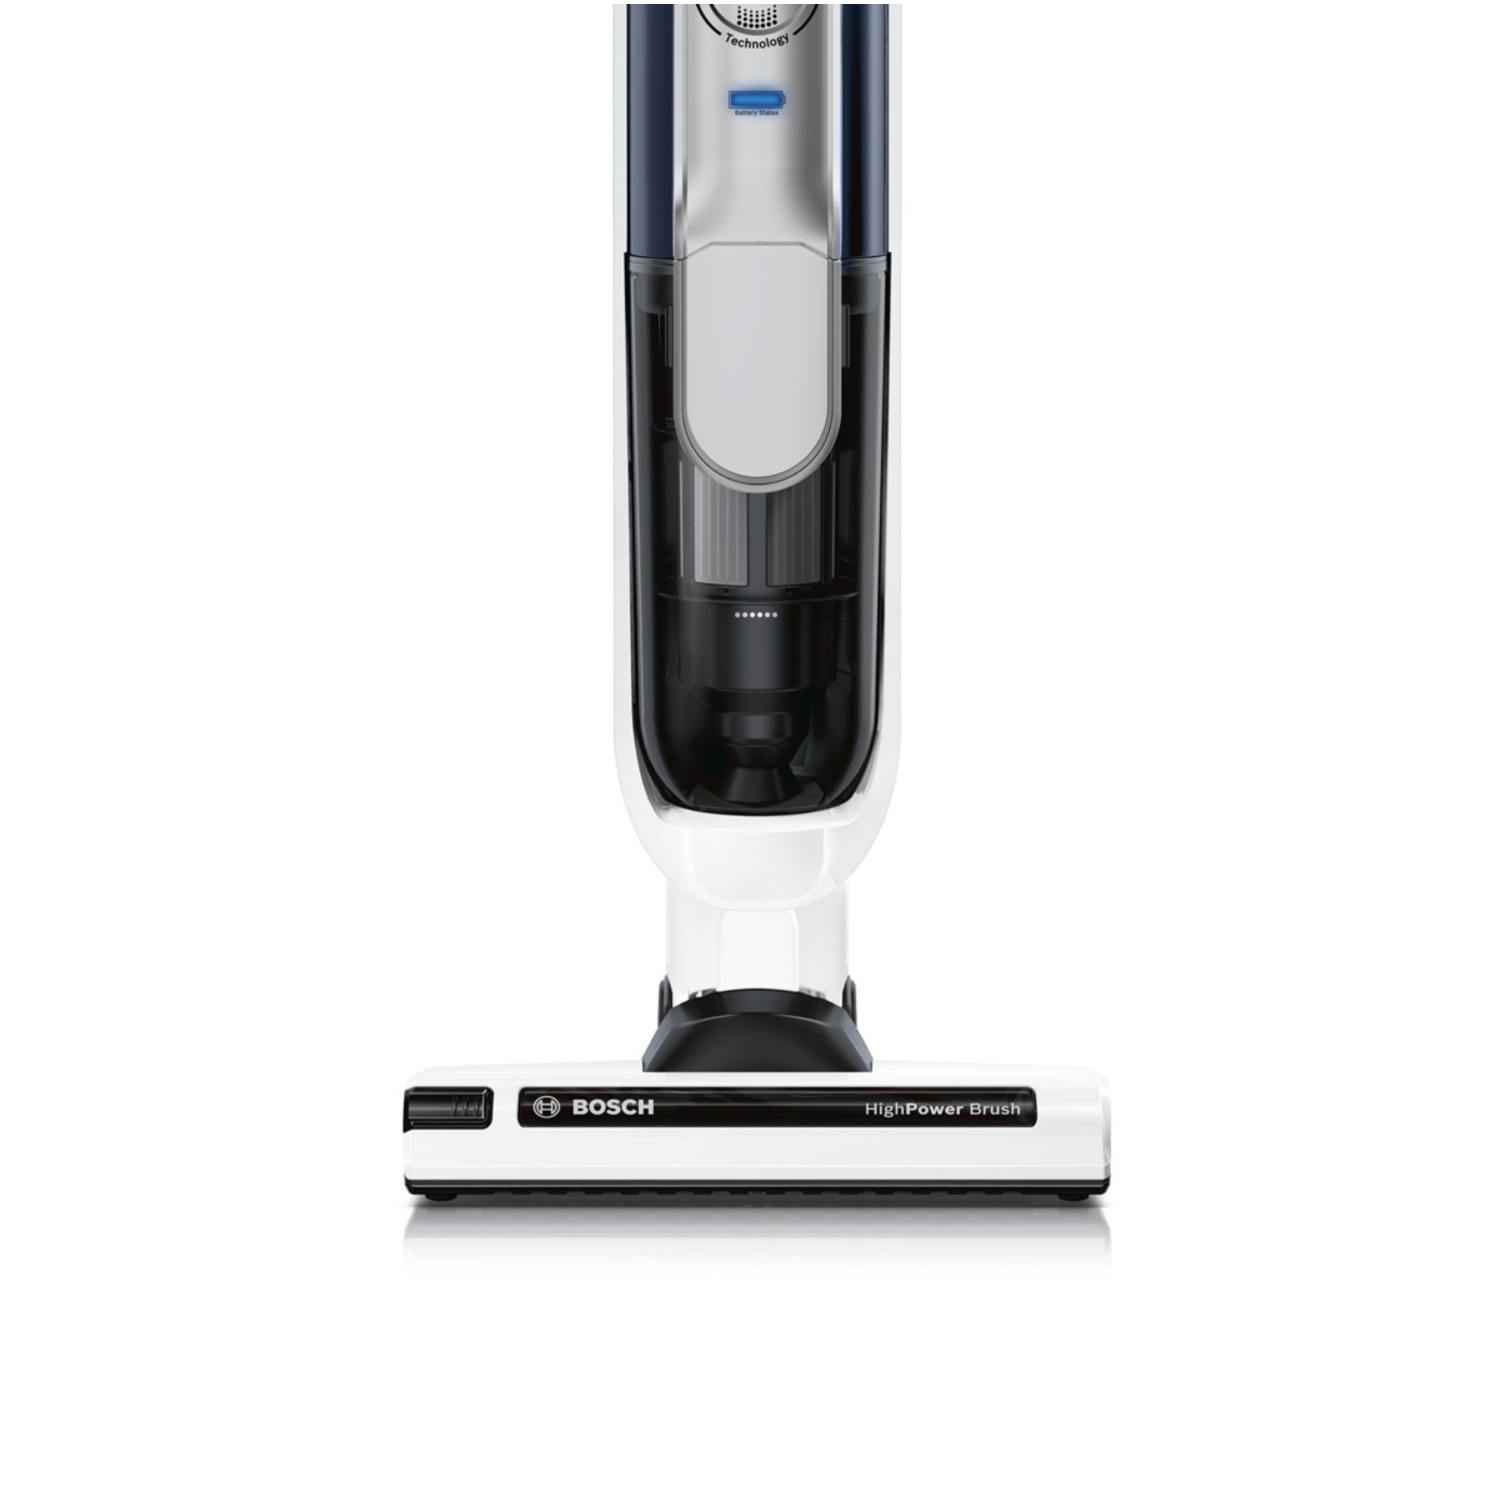 Bosch BCH6HYGGB Athlet ProHygienic Cordless Vacuum Cleaner - White - 60 Minute Run Time - 10